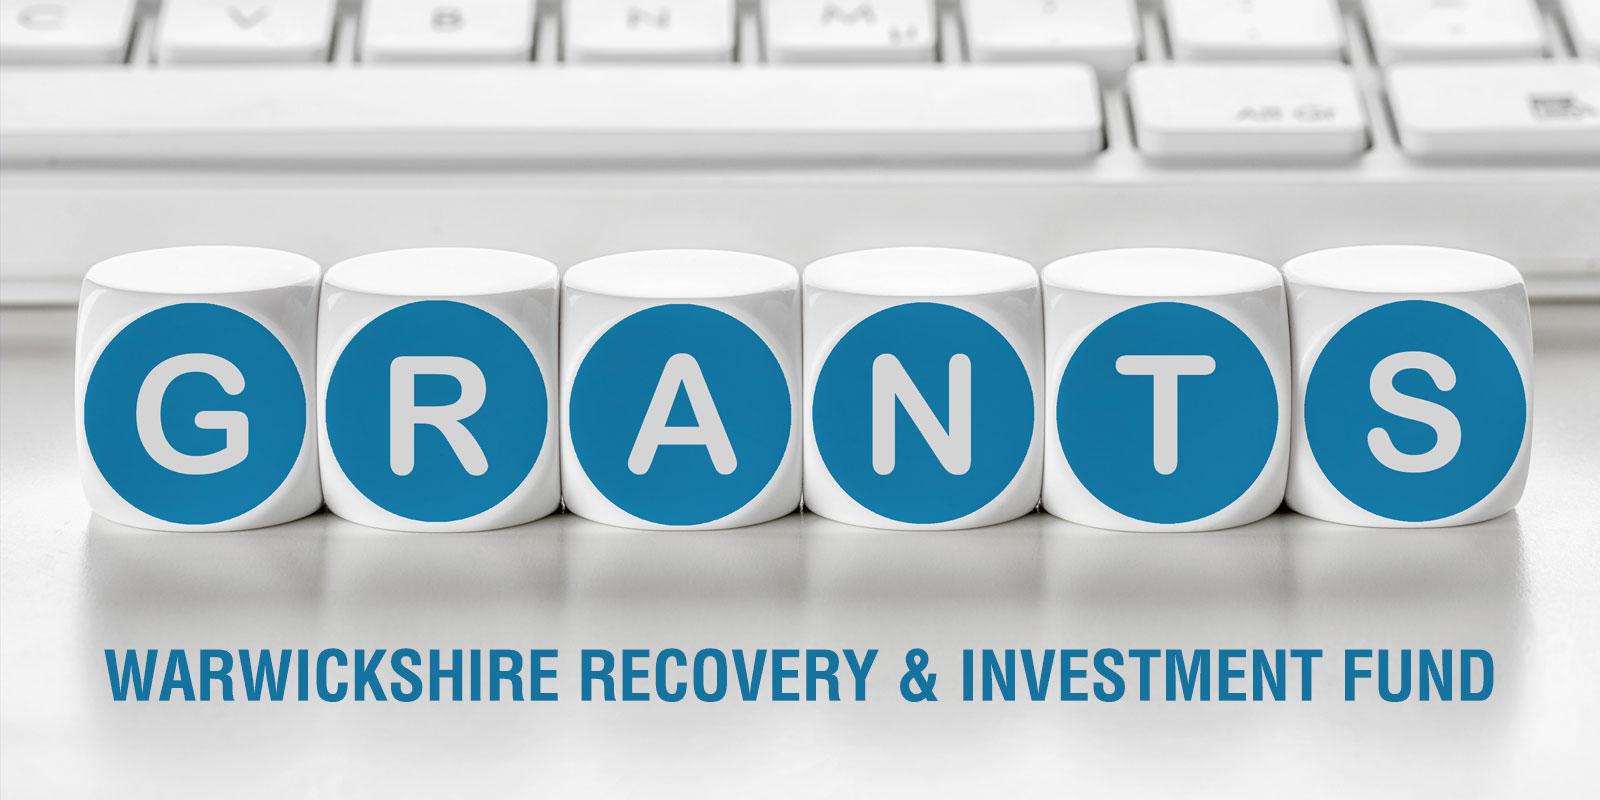 Warwickshire Recovery & Investment Fund